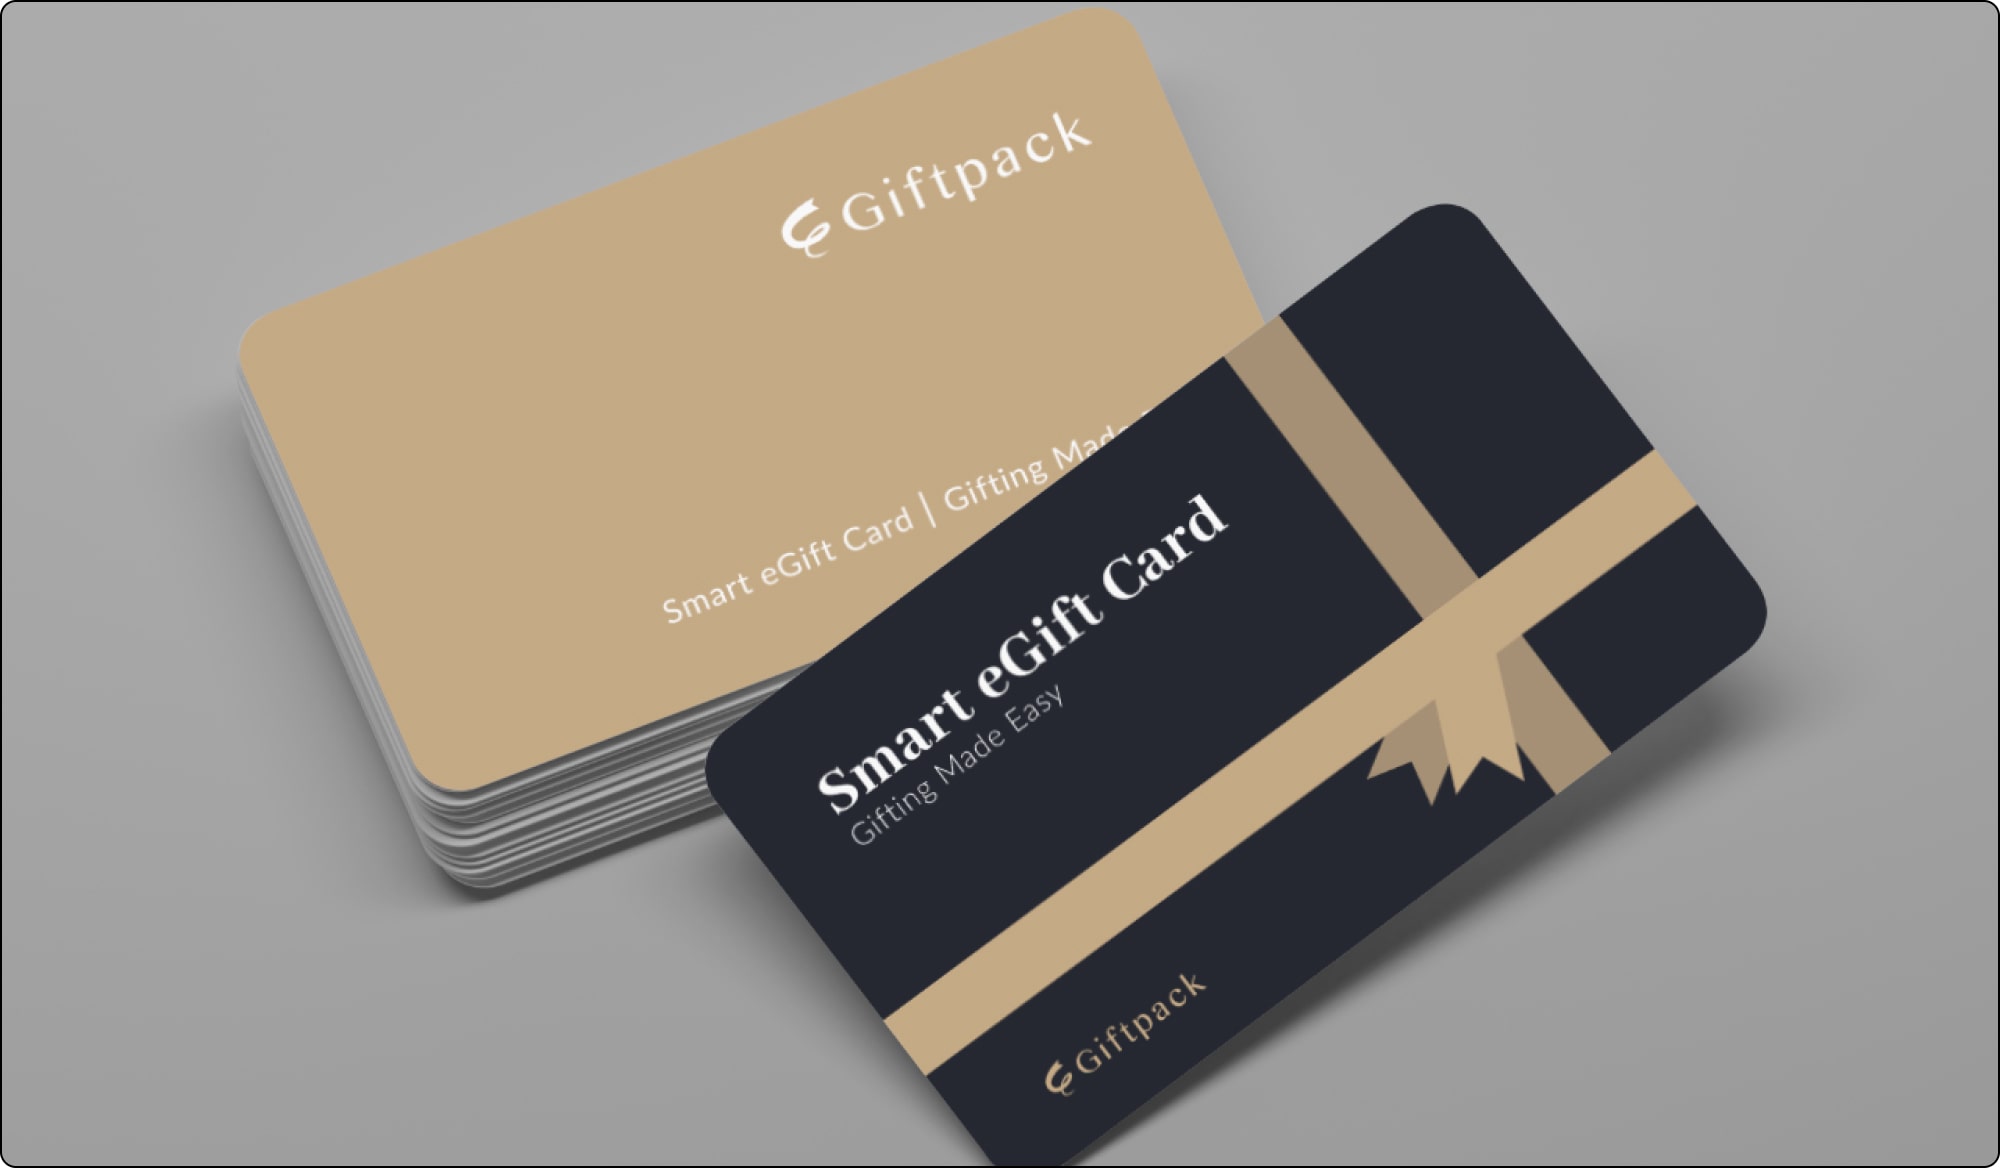 giftpack smart egift card for 350 brands for employee appreciation gifts under $5